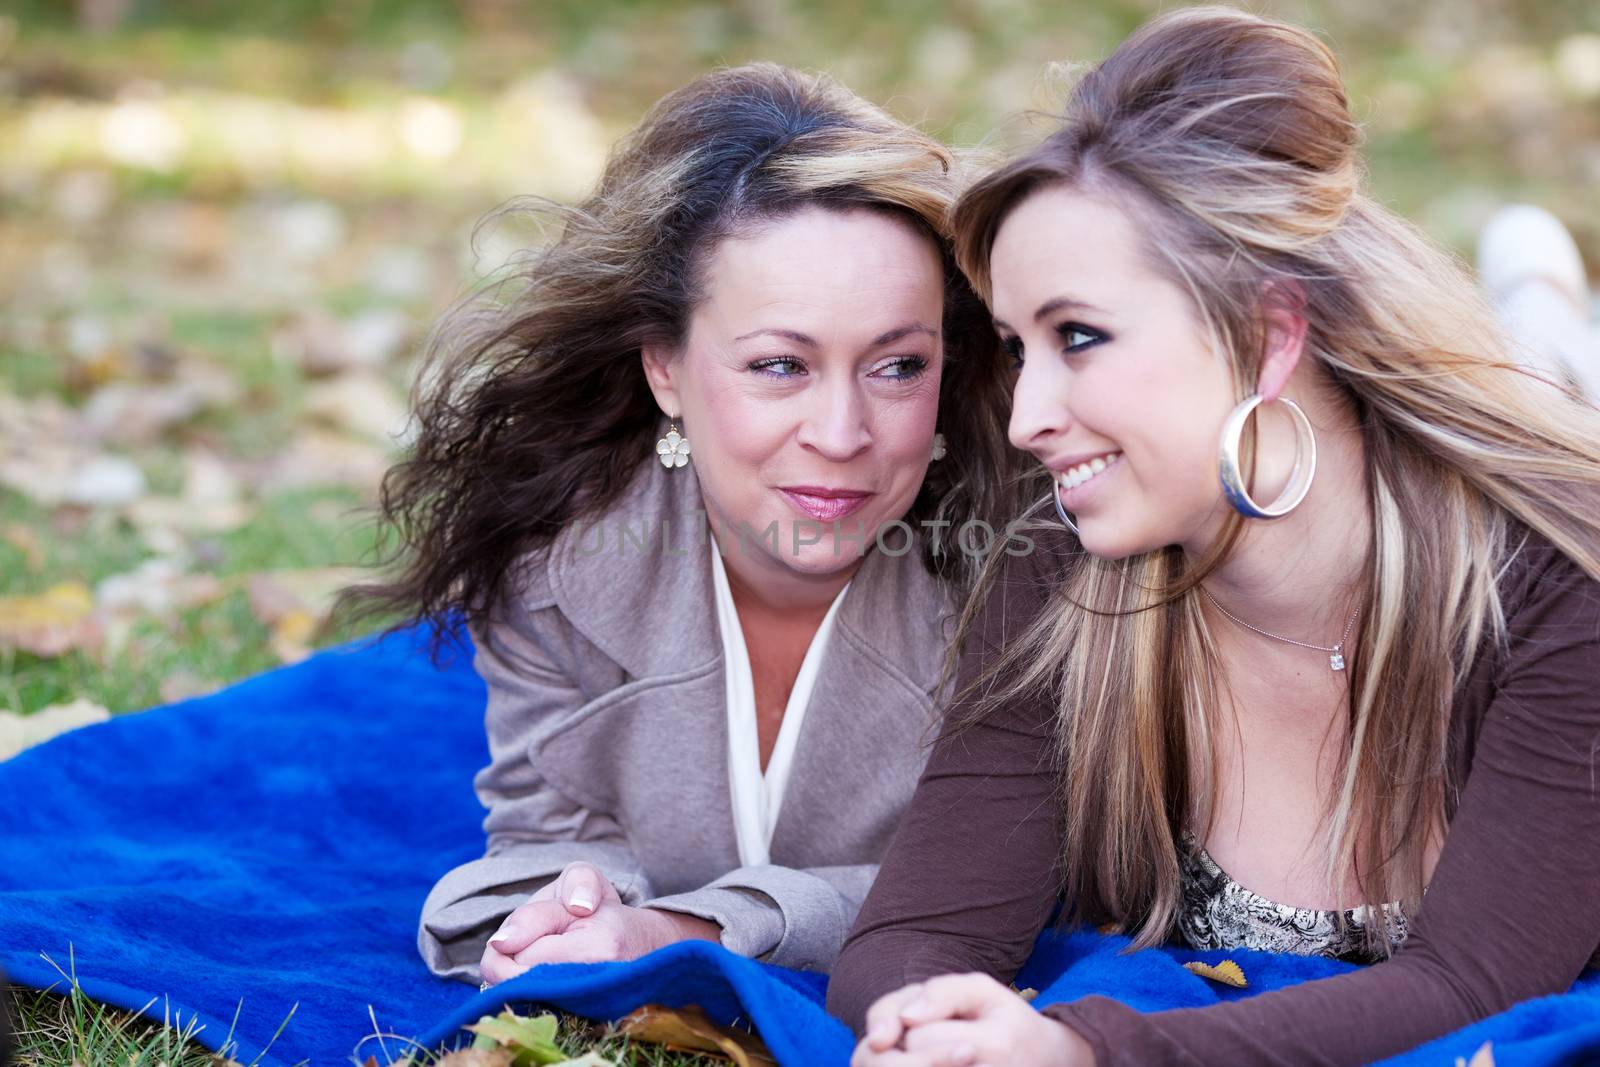 A mother looks lovingly at her daughter.  Shallow depth of field with focus on mother's expression.